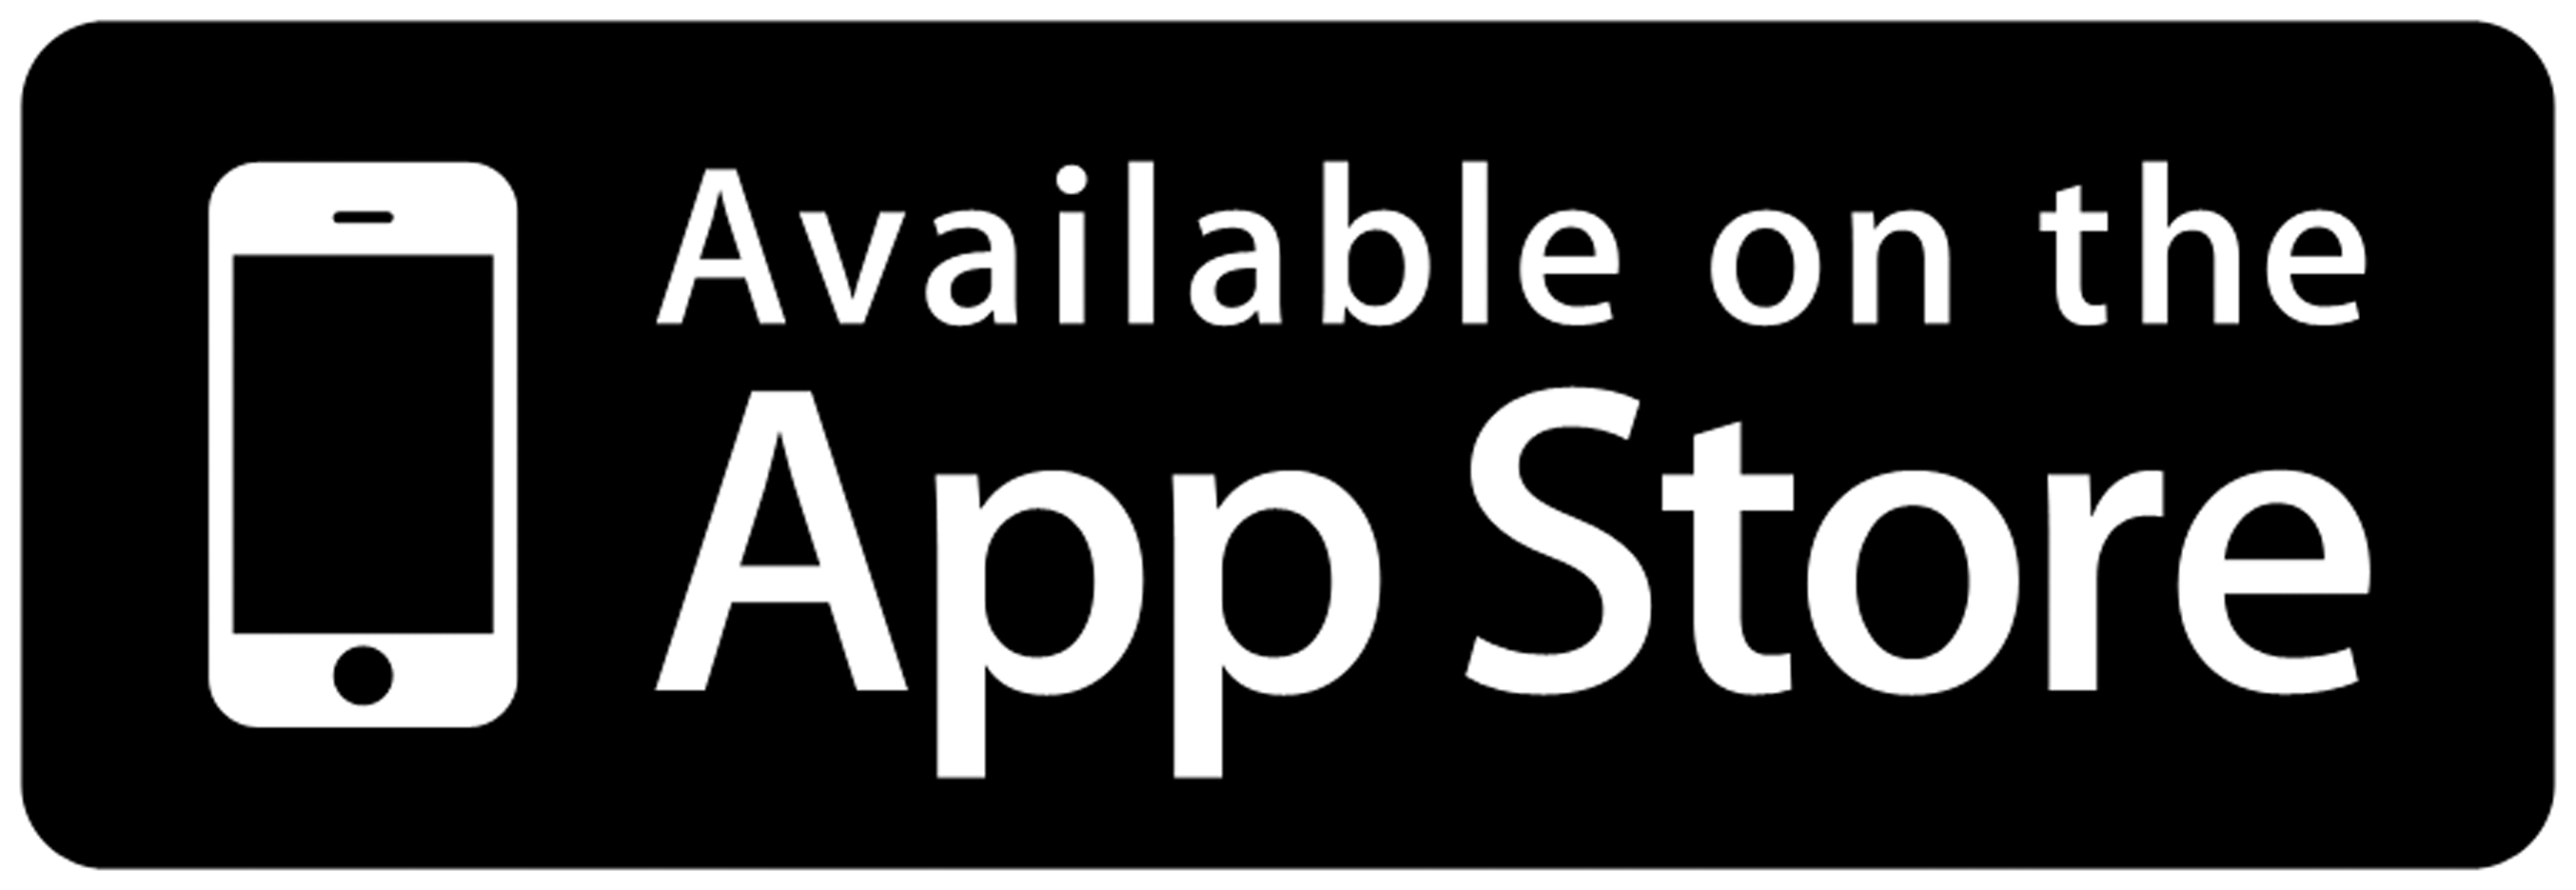 Available_on_the_App_Store